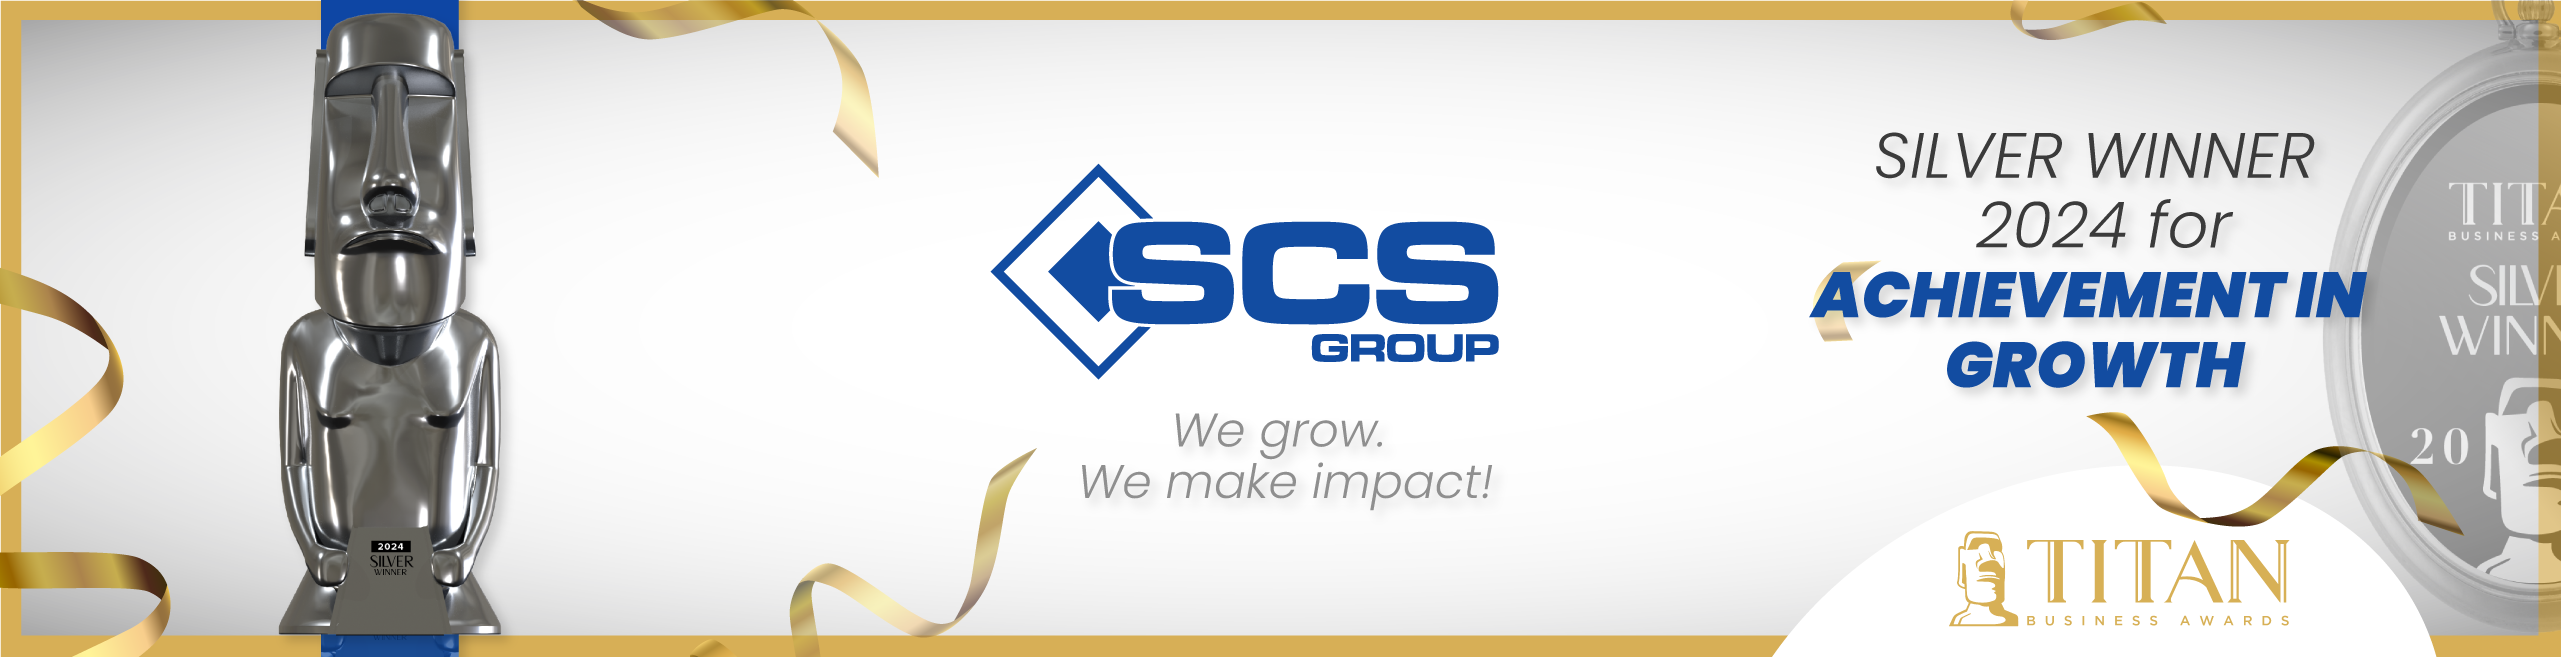 SCS Group Stands Triumphant in the 2024 TITAN Business Awards